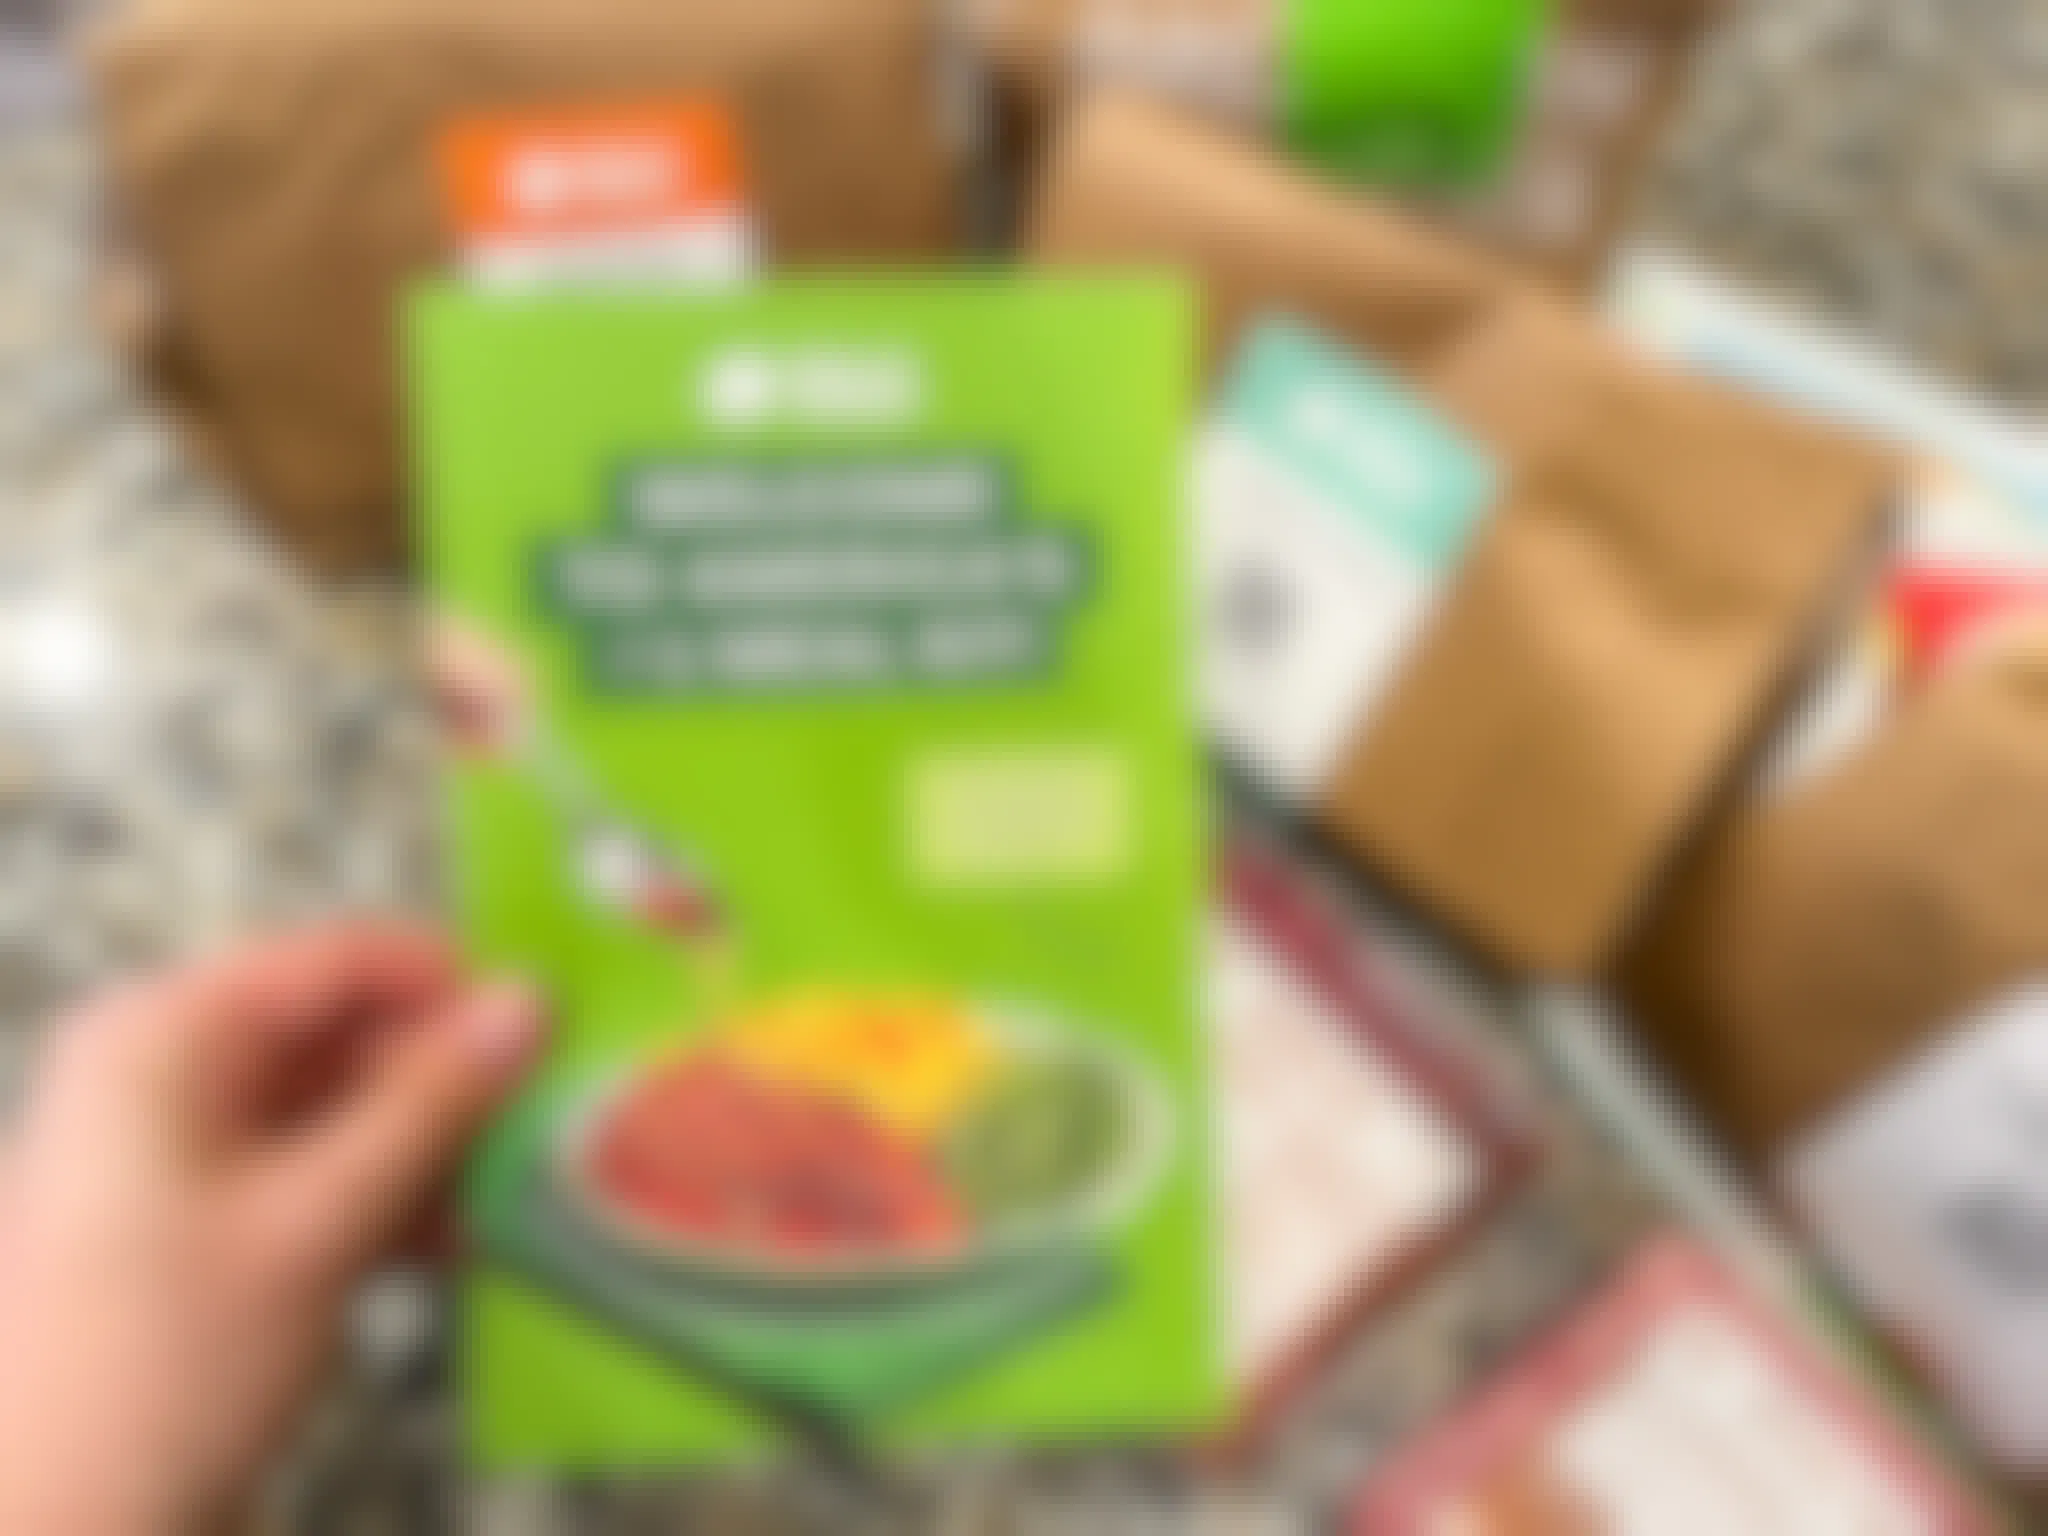 A bunch of HelloFresh bagged items laid out on the counter with a person holding up a Brochure for HelloFresh